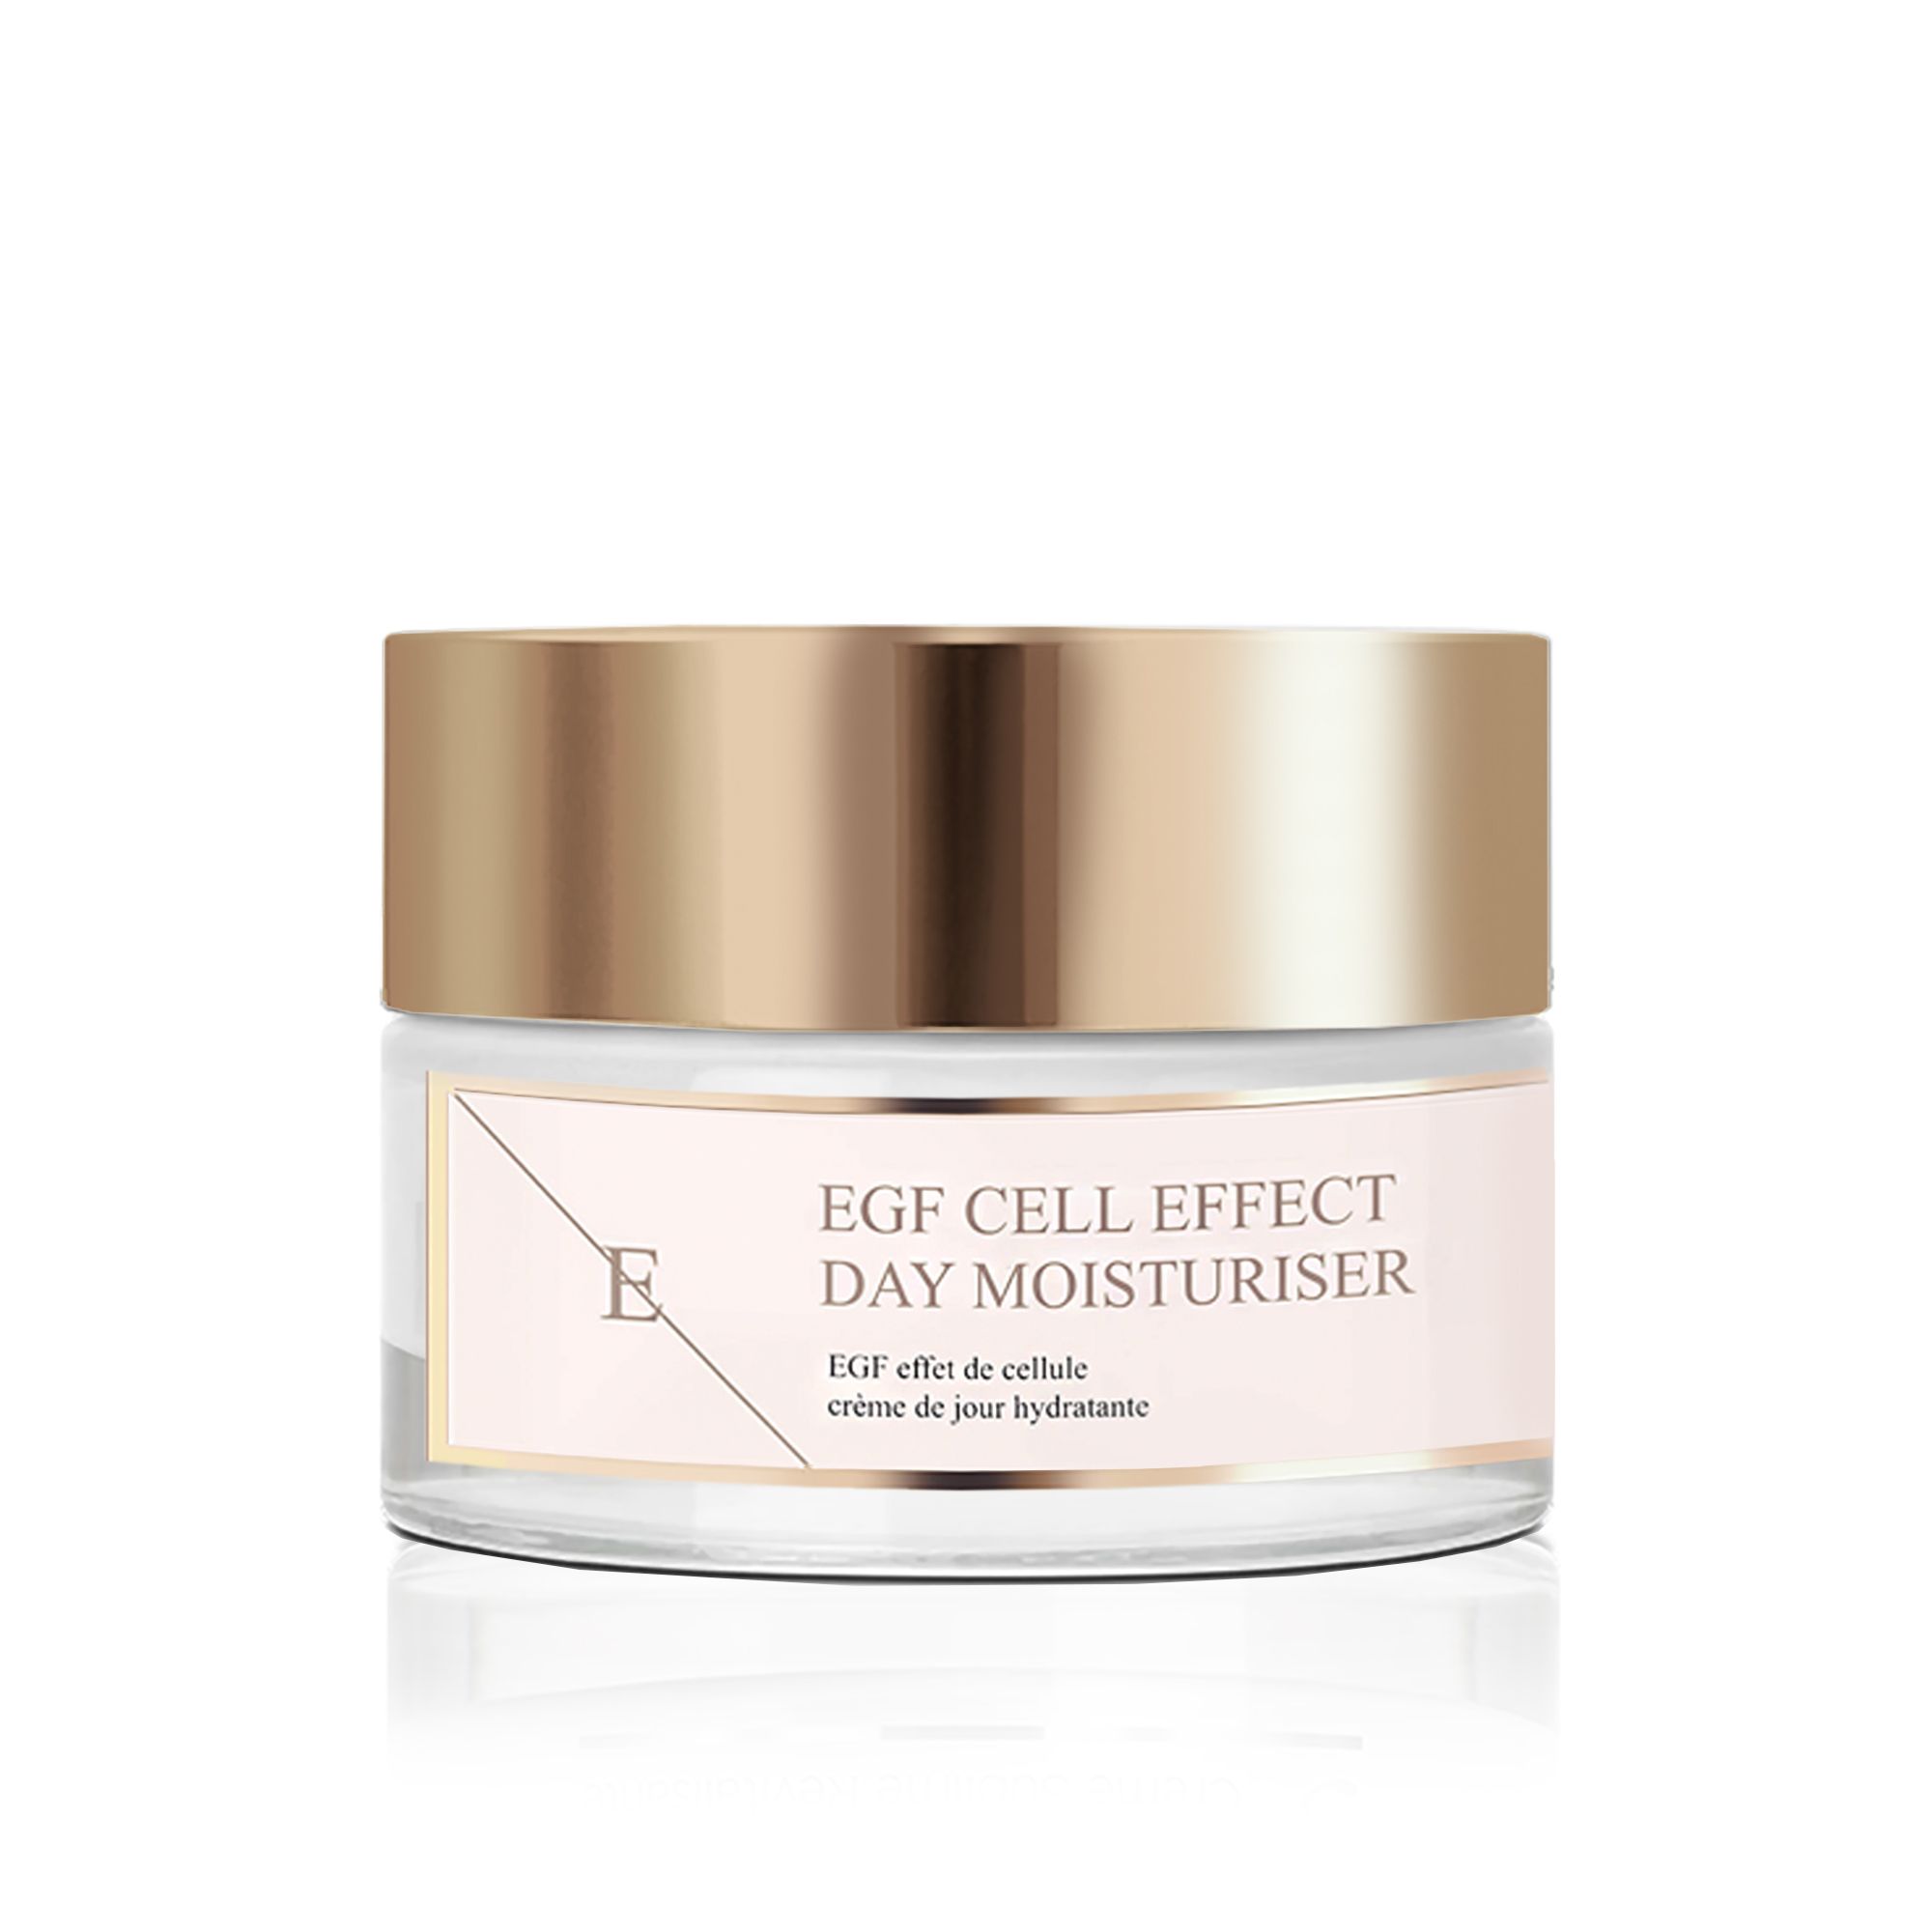 EGF CELL EFFECT NIGHT MOISTURISER

EGF Cell Effect night moisturiser aims to boost hydration and skin renewal for a smooth youthful looking skin. This night moisturiser contains a unique ingredient called SH-Oligopeptide-1 that has an identical chemical structure to an epidermal growth factor. Epidermal growth factor works to increase the rate of renewal of the skin smoothing the look of wrinkles and fine lines.

Key Ingredients:

SH-OLIGOPEPTIDE-1
SH-Oligopeptide-1 that has an identical chemical structure to an epidermal growth factor. Epidermal growth factor works to increase the rate of renewal of the skin smoothing the look of wrinkles and fine lines.

SODIUM HYALURONATE
Hyaluronic Acid is naturally found in our skin, as we age our body's natural production of hyaluronic acid slows down. Hyaluronic acid is a key element making the skin looking plump and youthful as it holds moisture 1000 times its own weight. Our hyaluronic acid is called Sodium Hyaluronate and it is a smaller size of hyaluronic acid that is able to penetrate and hydrate more deeper levels of the skin than normal hyaluronic acid.

JAPANESE TEA OIL
Japanese tea oil is high in antioxidants that protect the skin from free radical stress that can damage the skin.

SHEA BUTTER
Shea butter is known for its moisturising and skin softening benefits. It is also high in vitamin E, A and F that protect the skin from free radical stress.

ARGAN OIL
Argan oil is lightweight quickly absorbing oil with great fatty acids ratio that moisturises the skin and boosts skin softness.

USAGE: Apply a pea-sized amount of the cream on cleansed face, neckline and neck in the evening.